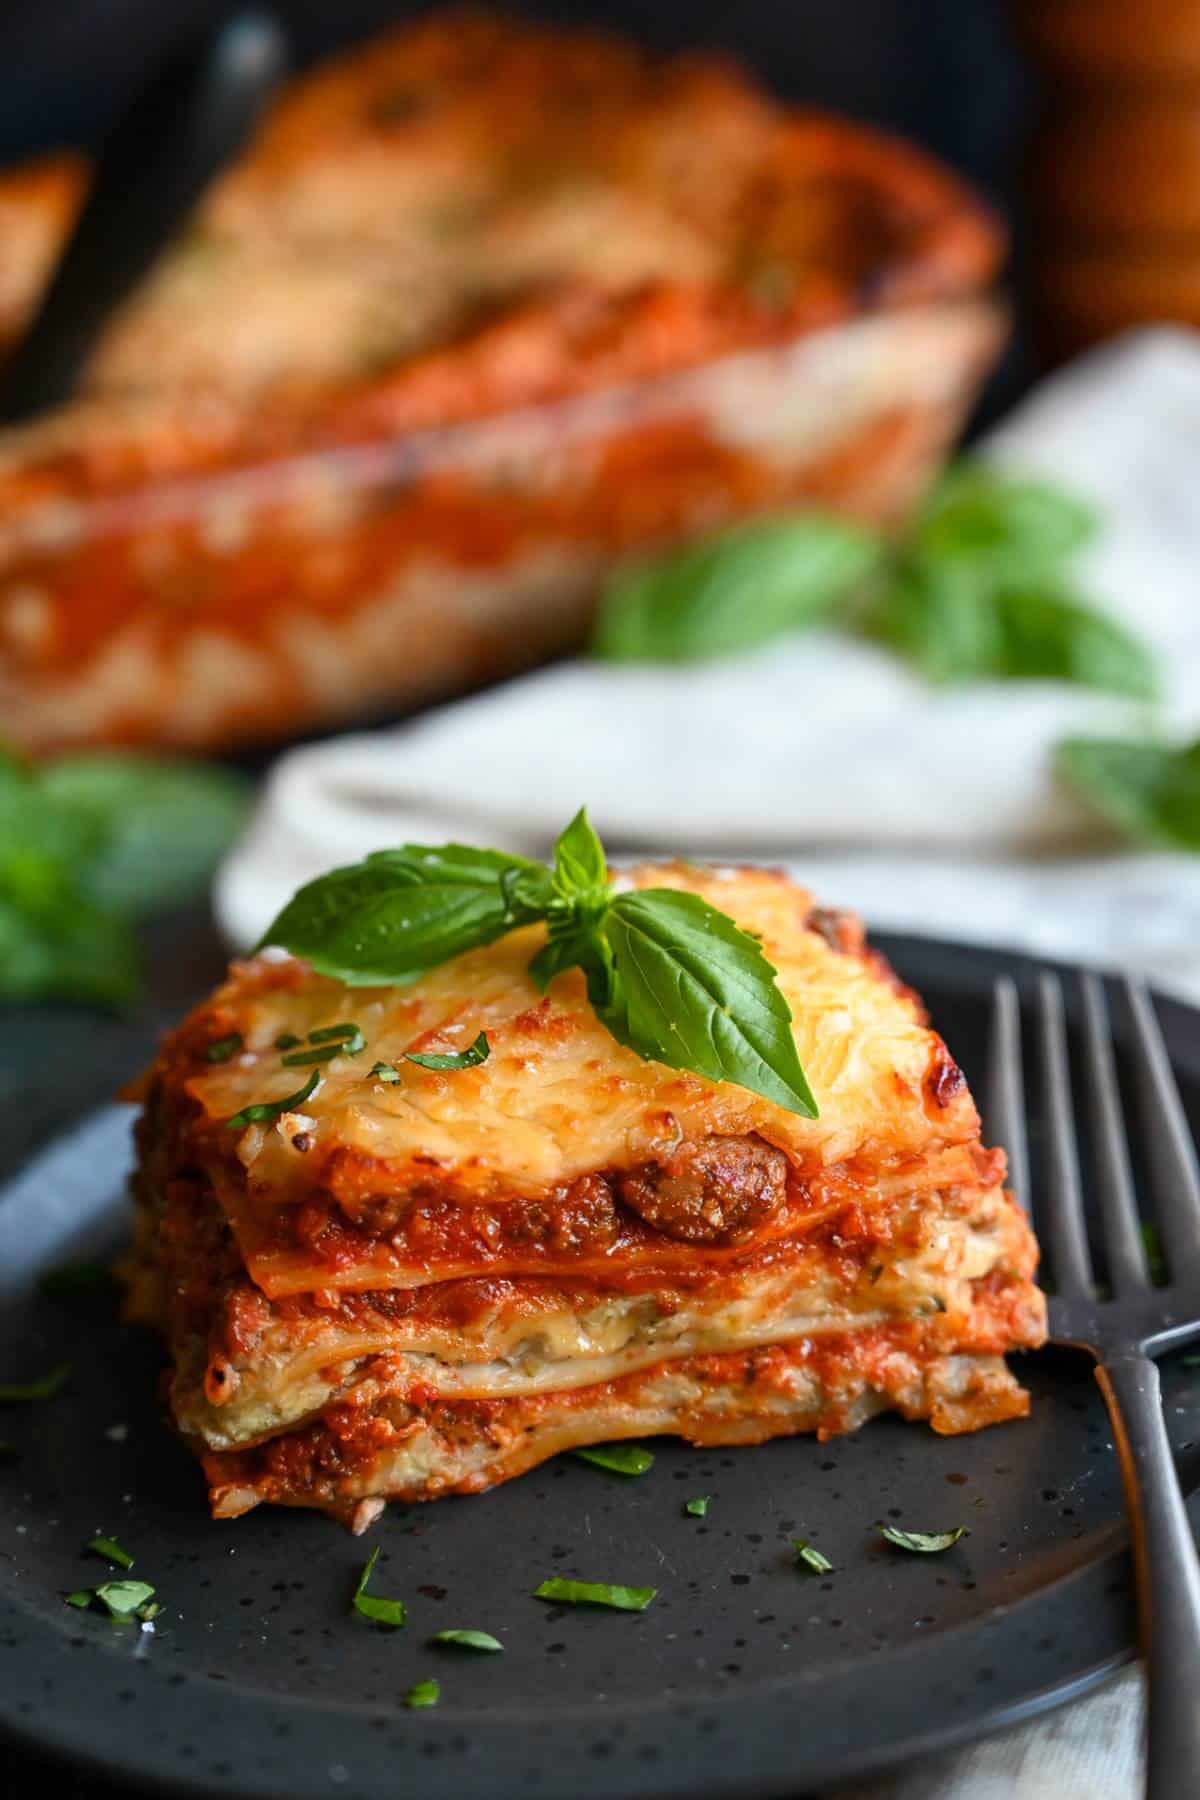 lasagna served on a plate with fresh basil garnish with the pan of lasagna in the background